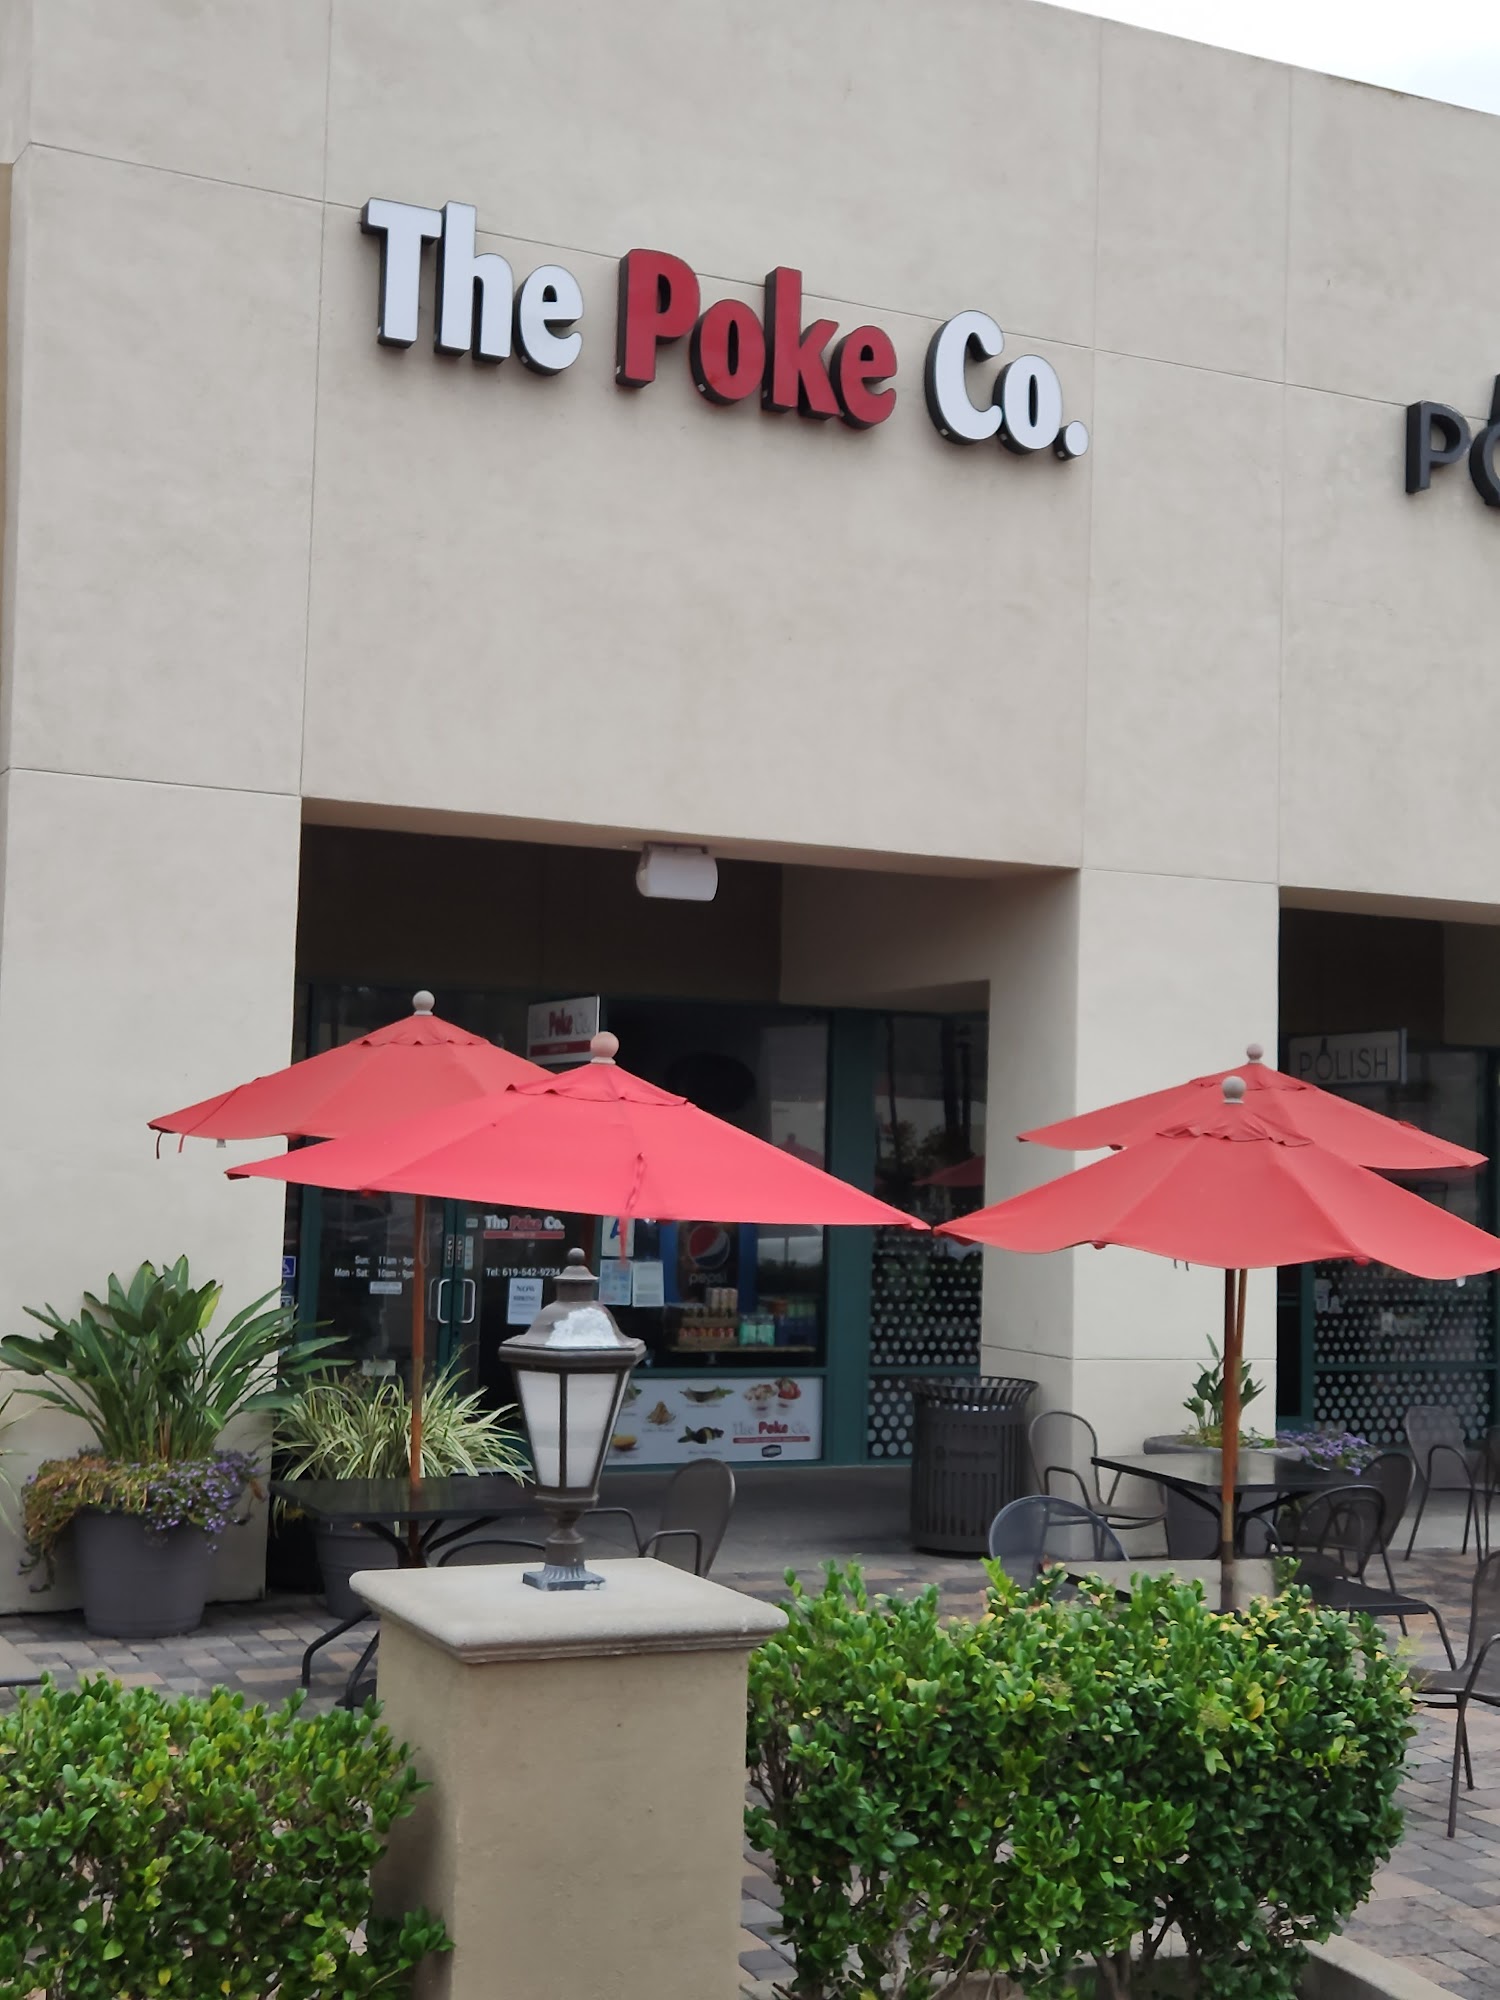 The Poke Co. - Mission Valley